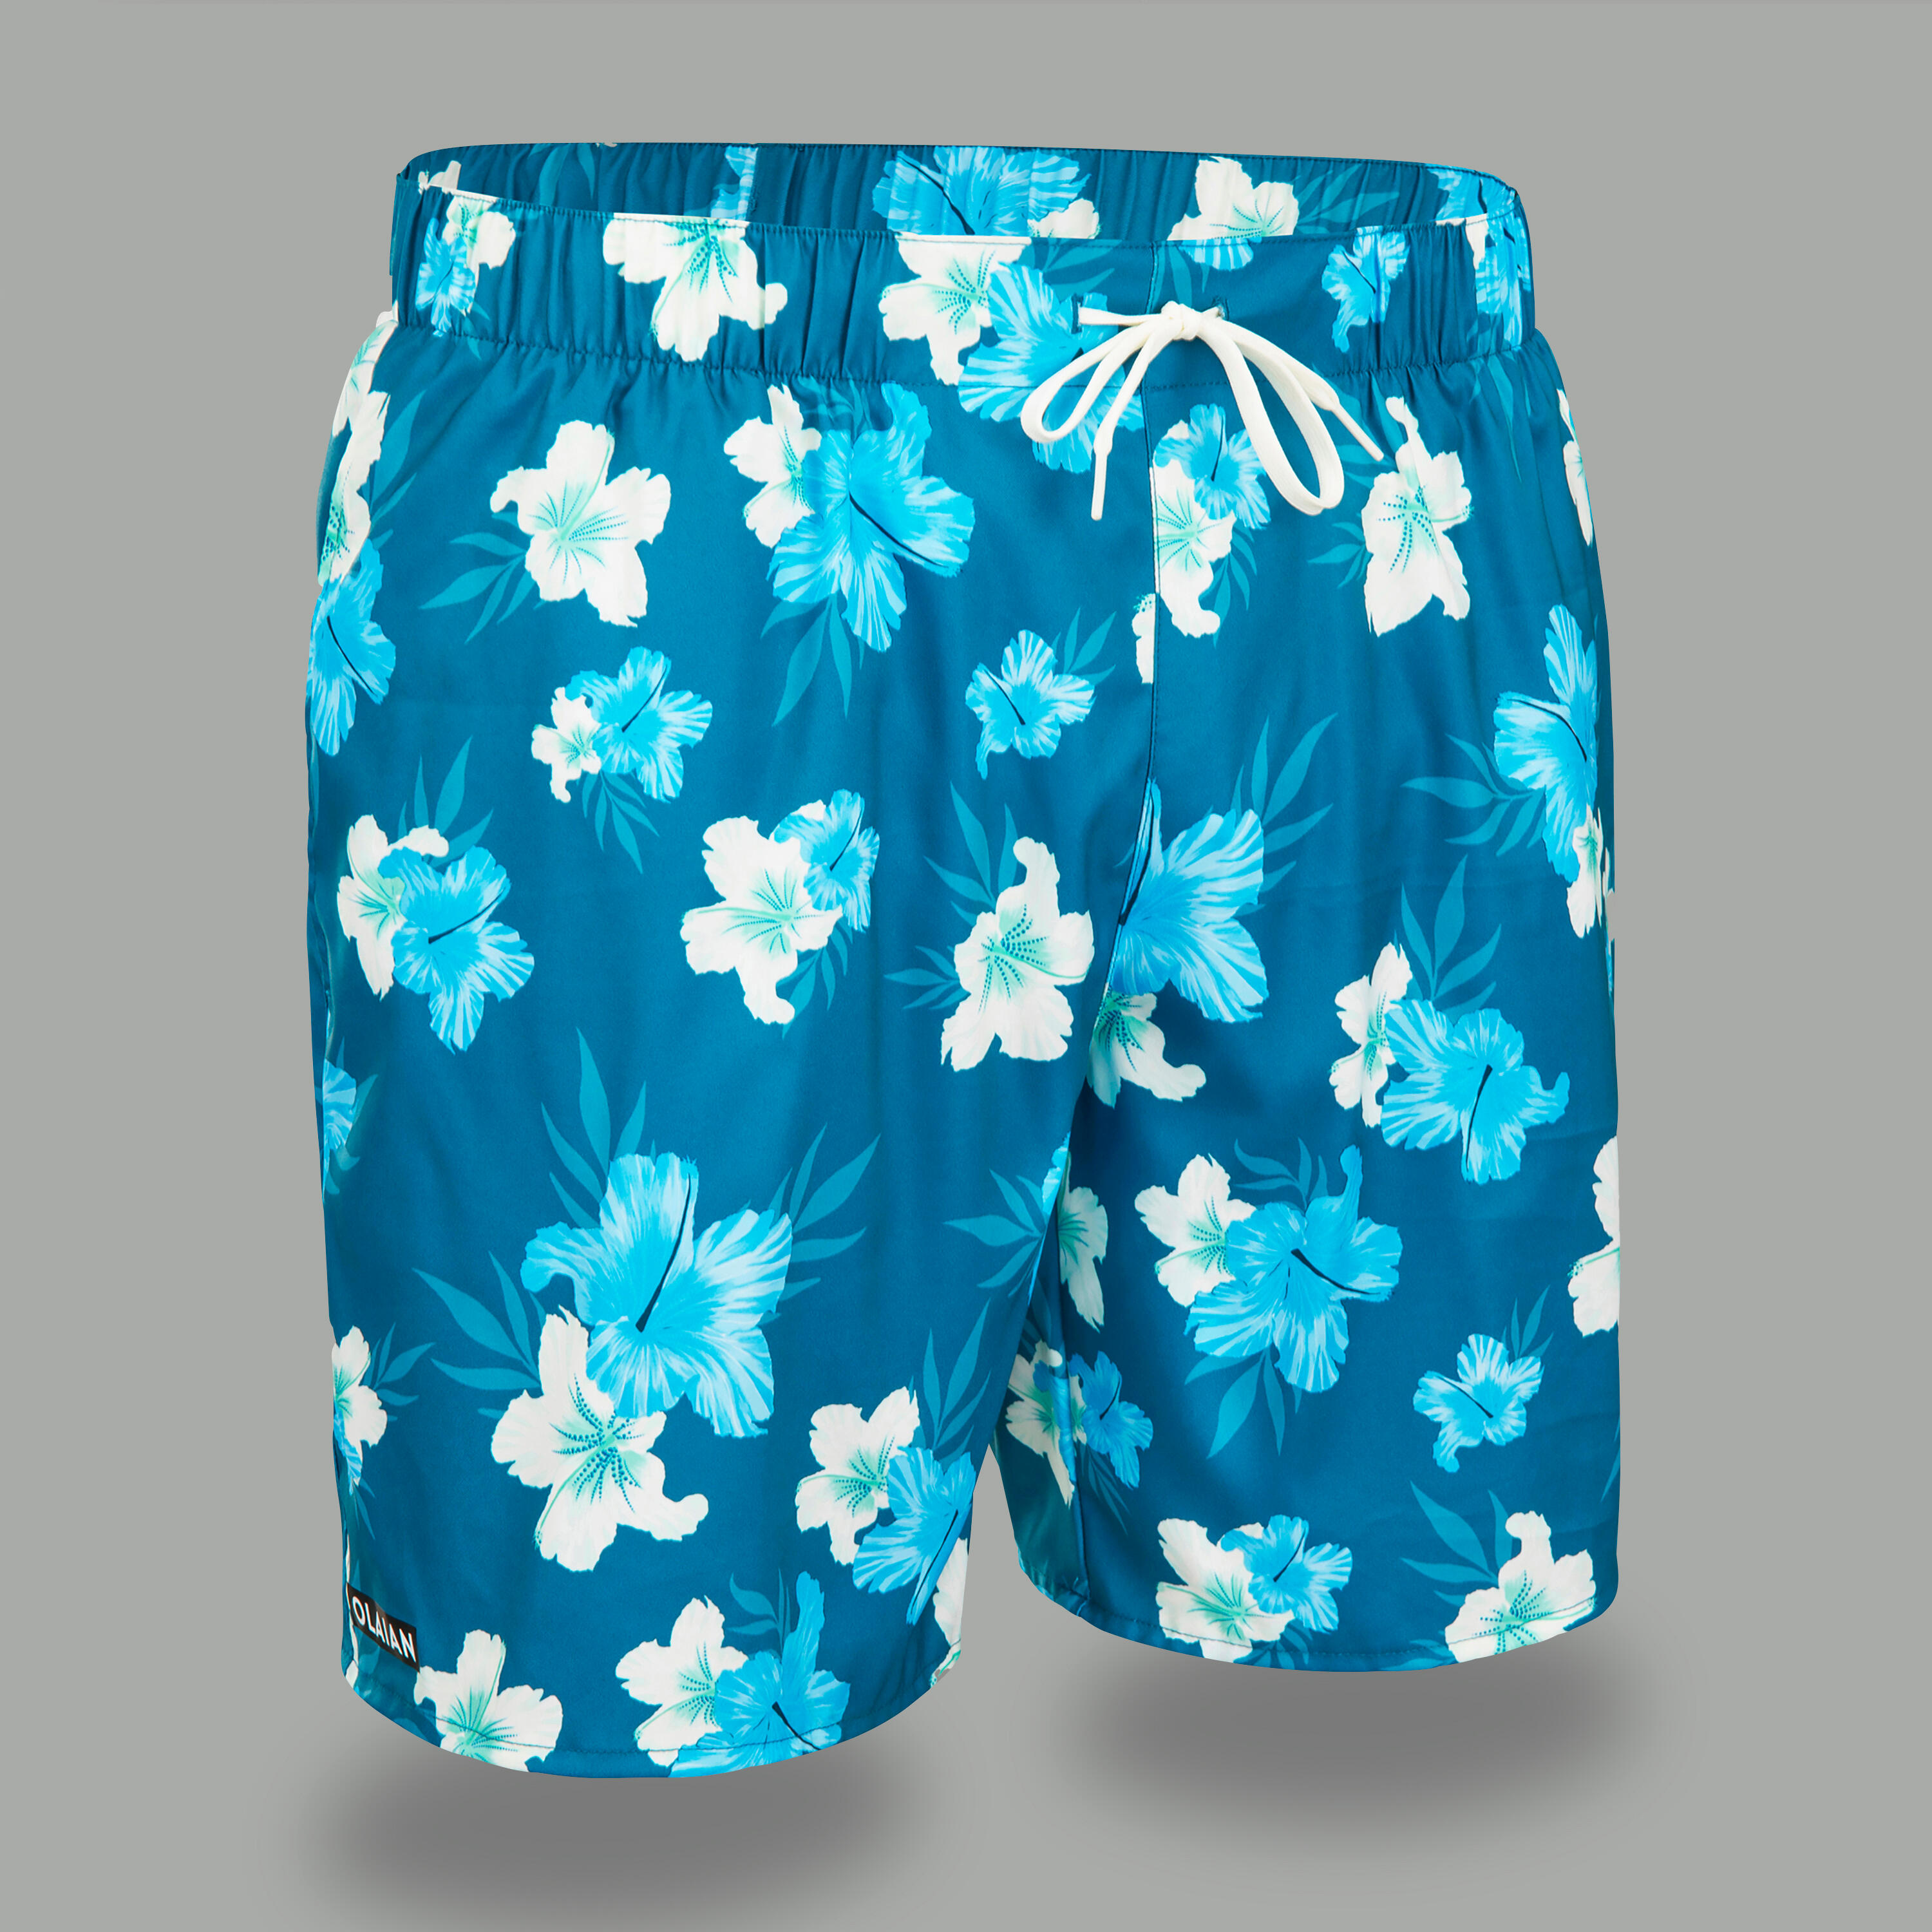 OLAIAN Surfing BS100 15" eco boardshorts VENICE BLUE